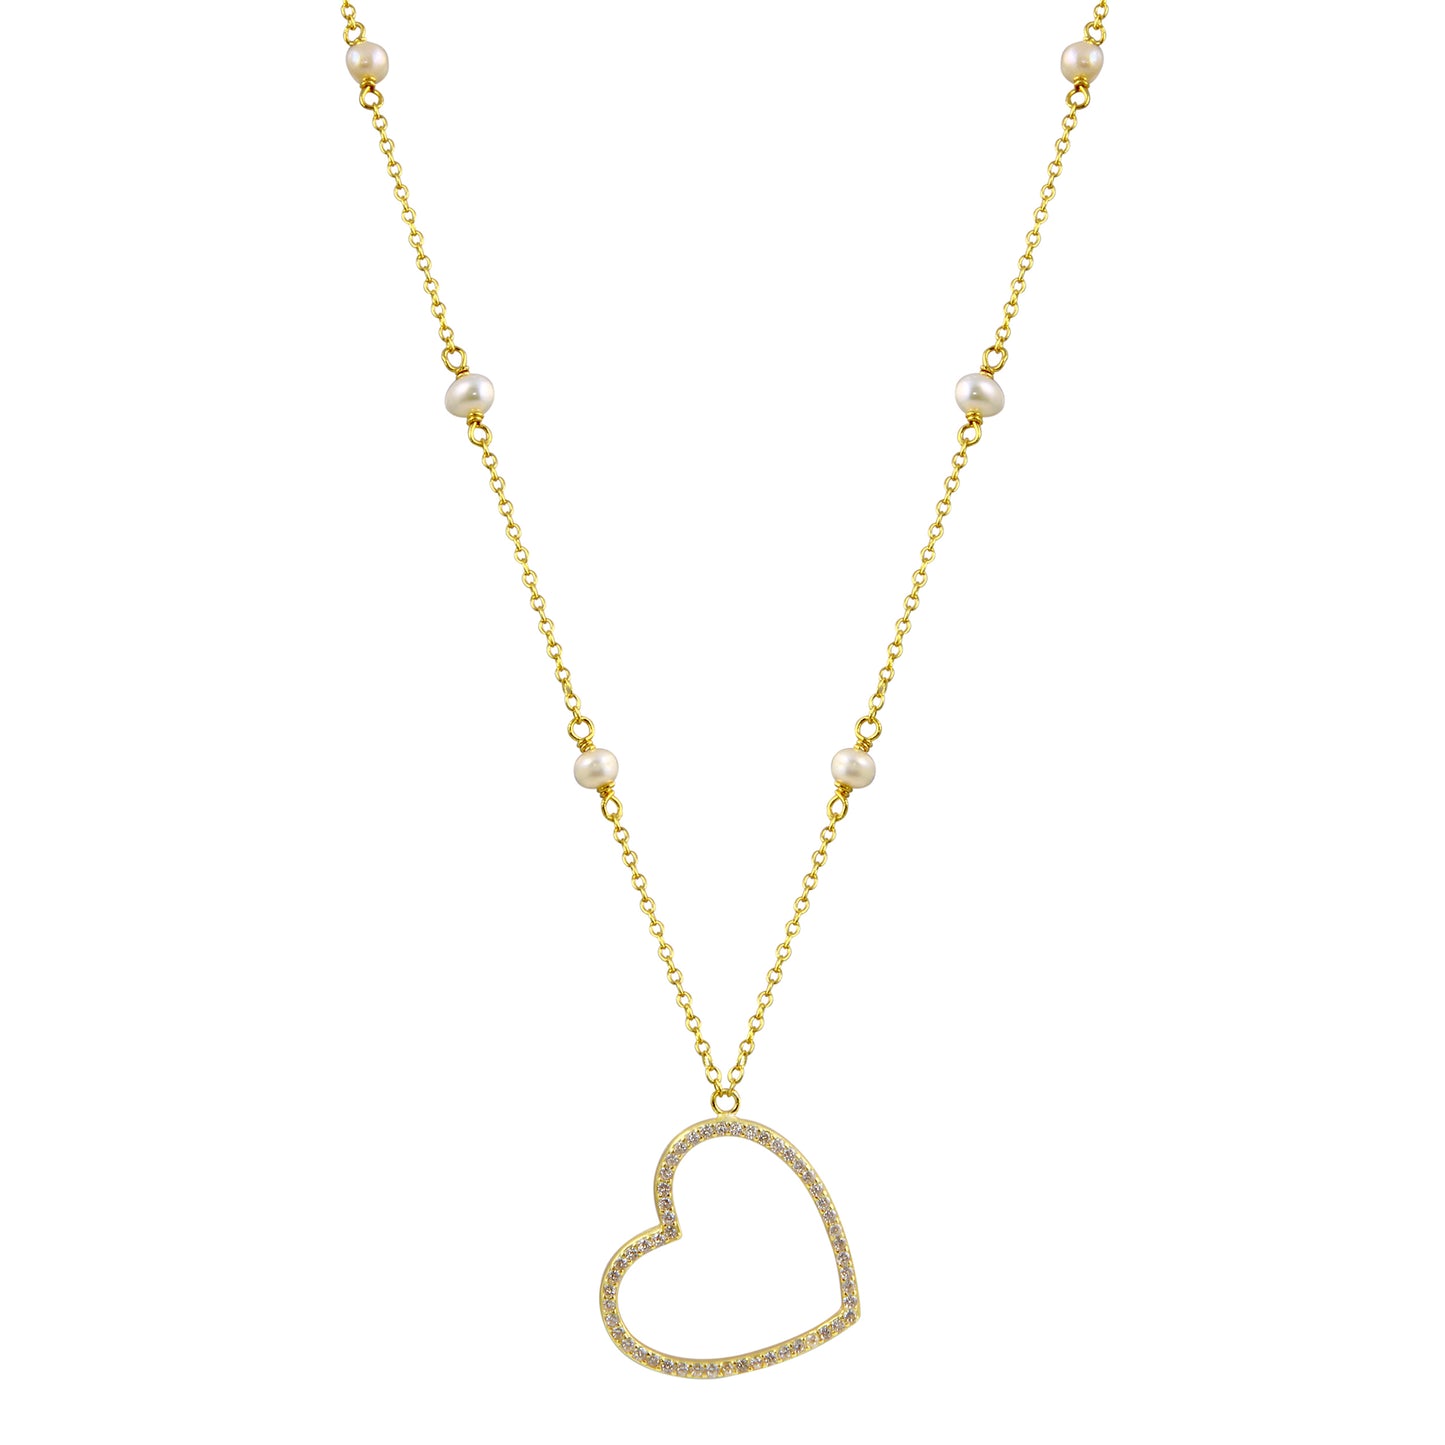 Pave Big Heart Pearls chain Necklace